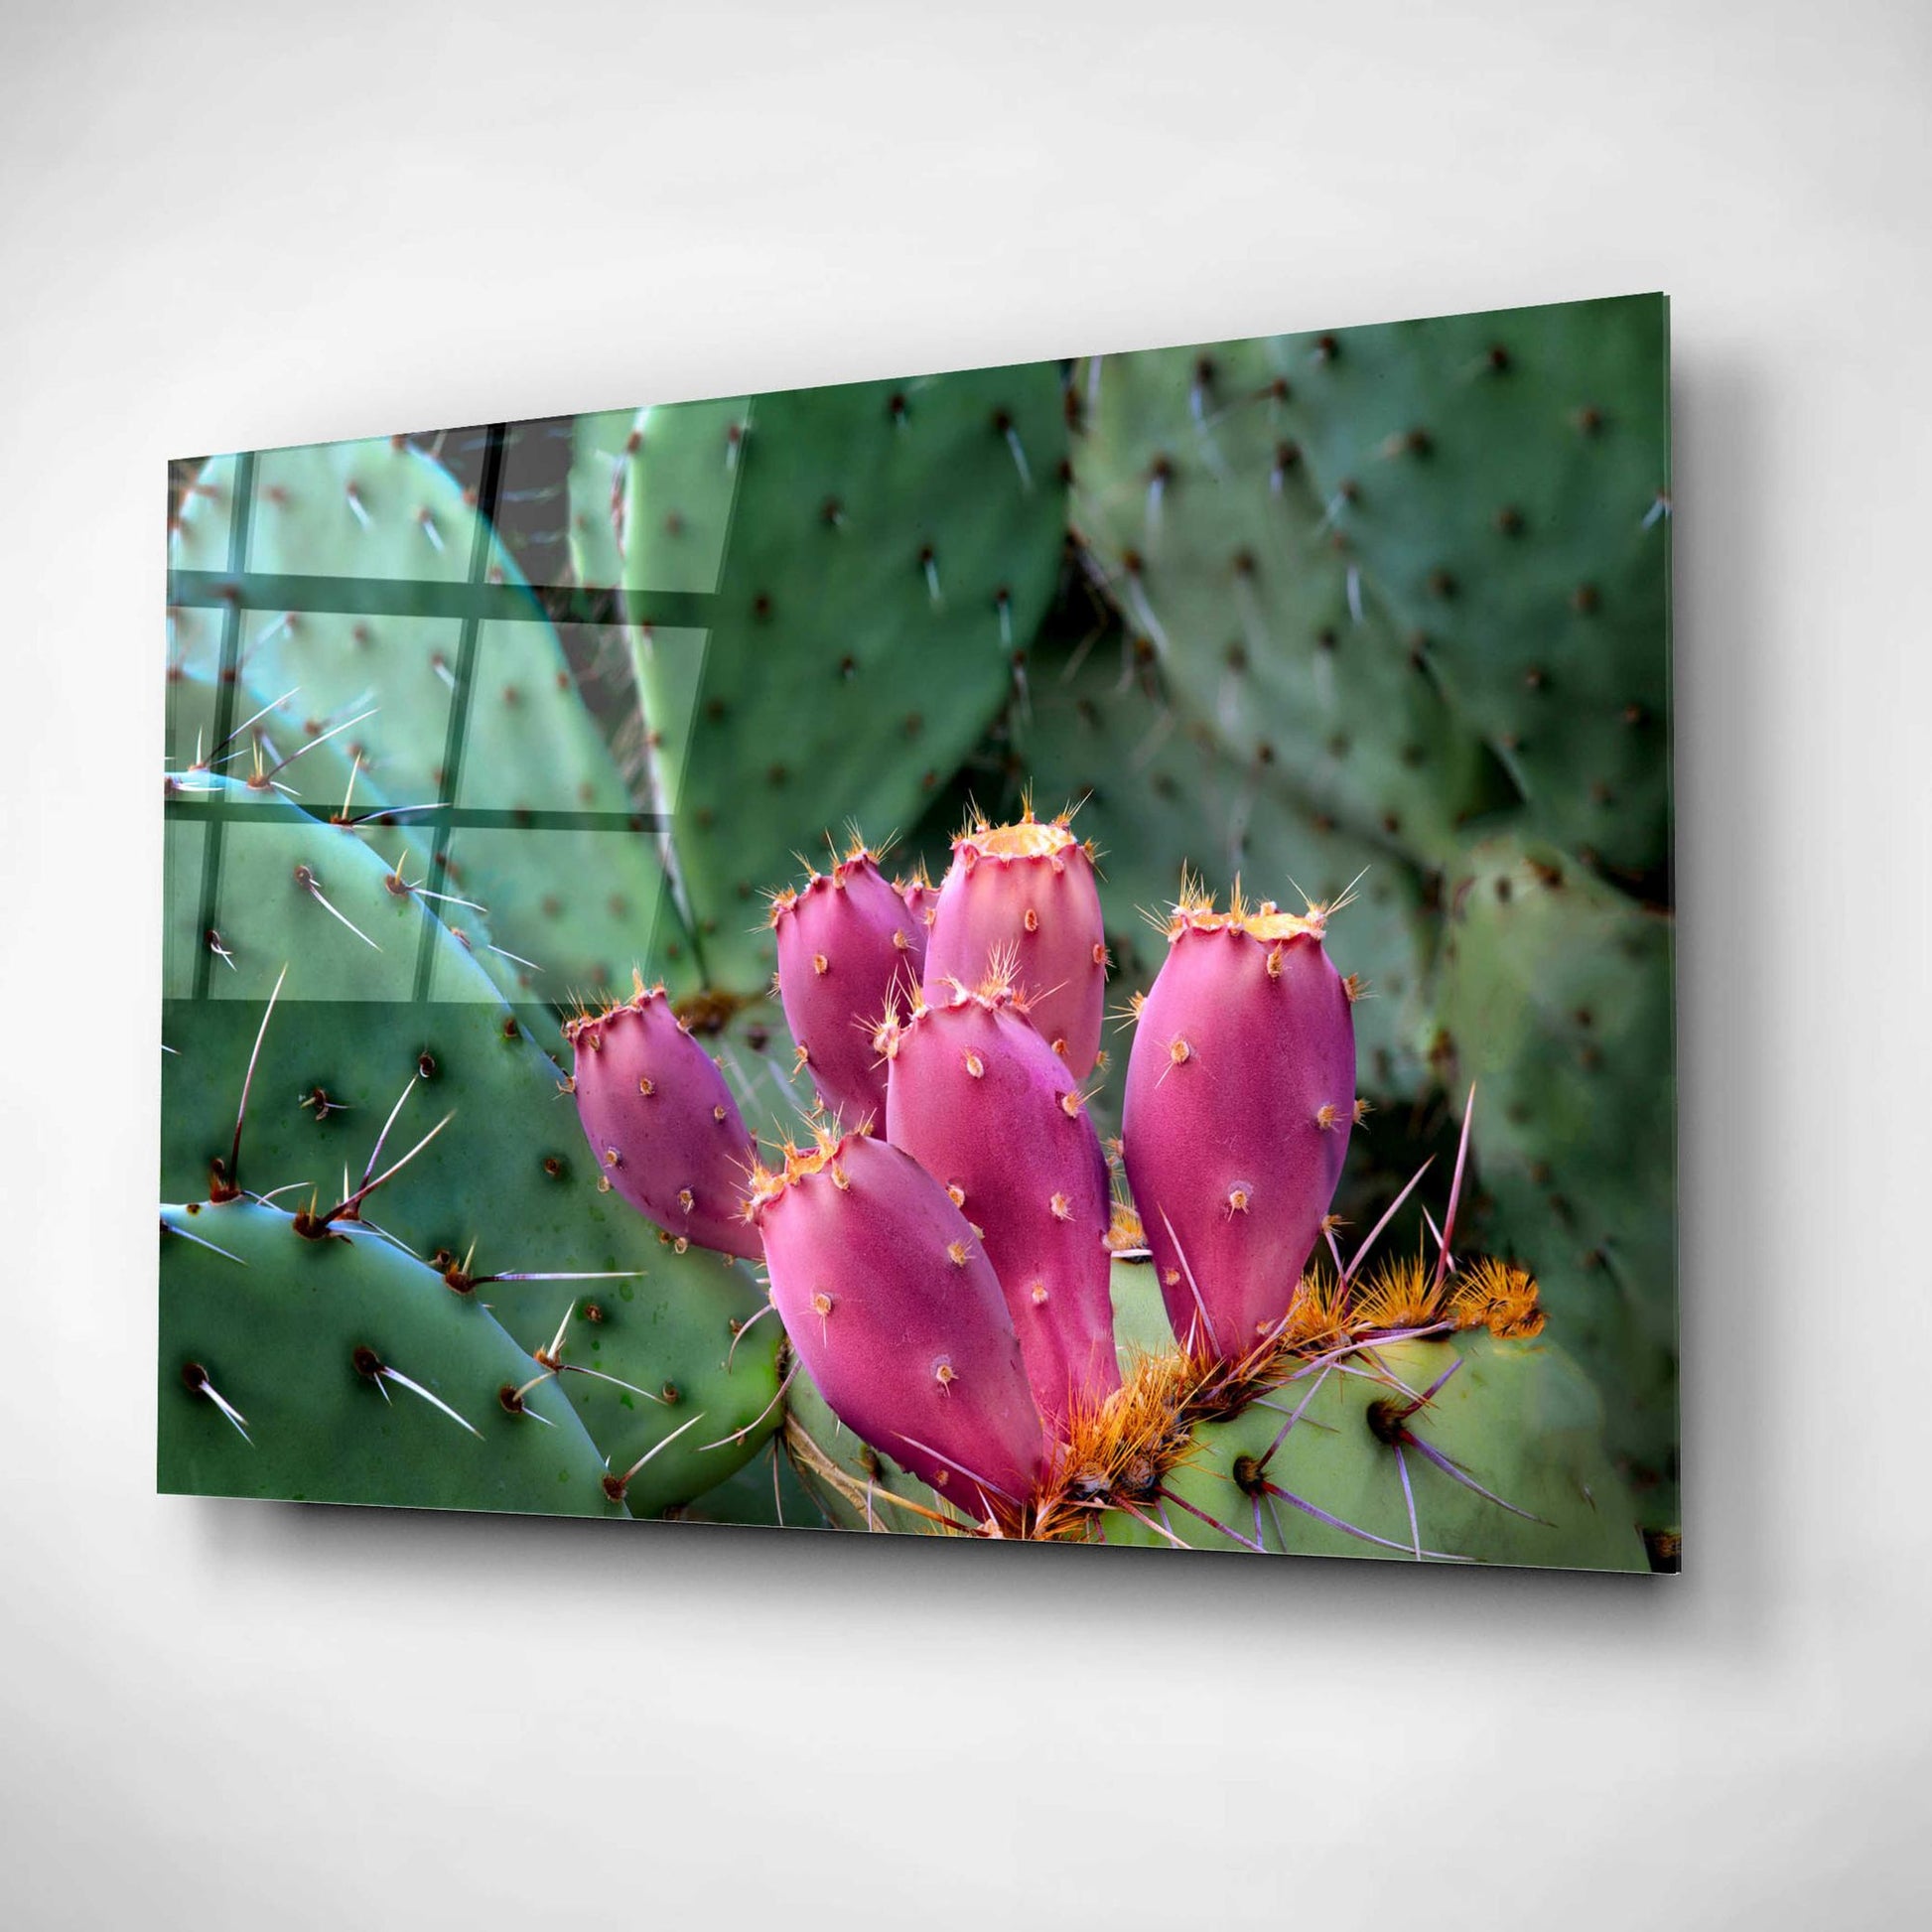 Epic Art 'Pink Cactus' by Dennis Frates, Acrylic Glass Wall Art,24x16